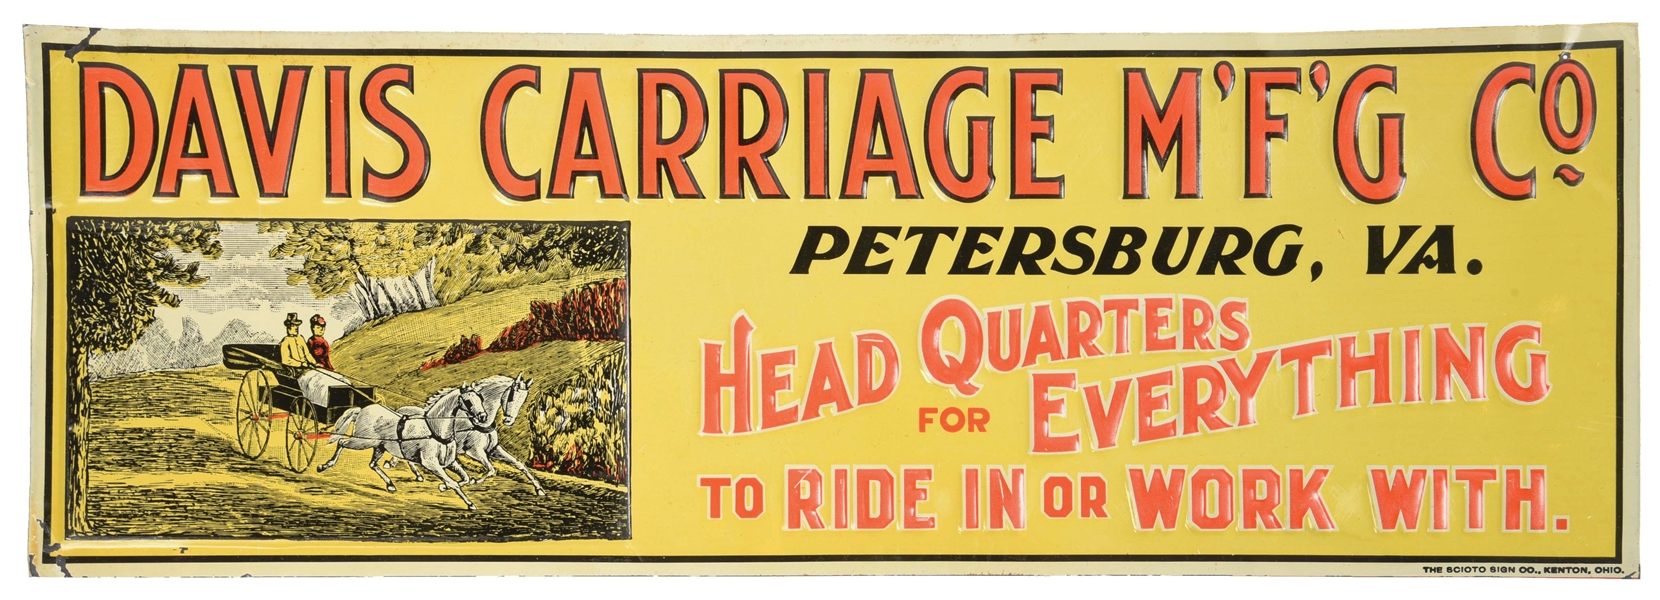 EMBOSSED DAVIS CARRIAGE TIN SIGN W/ HORSE & CARRIAGE GRAPHIC.